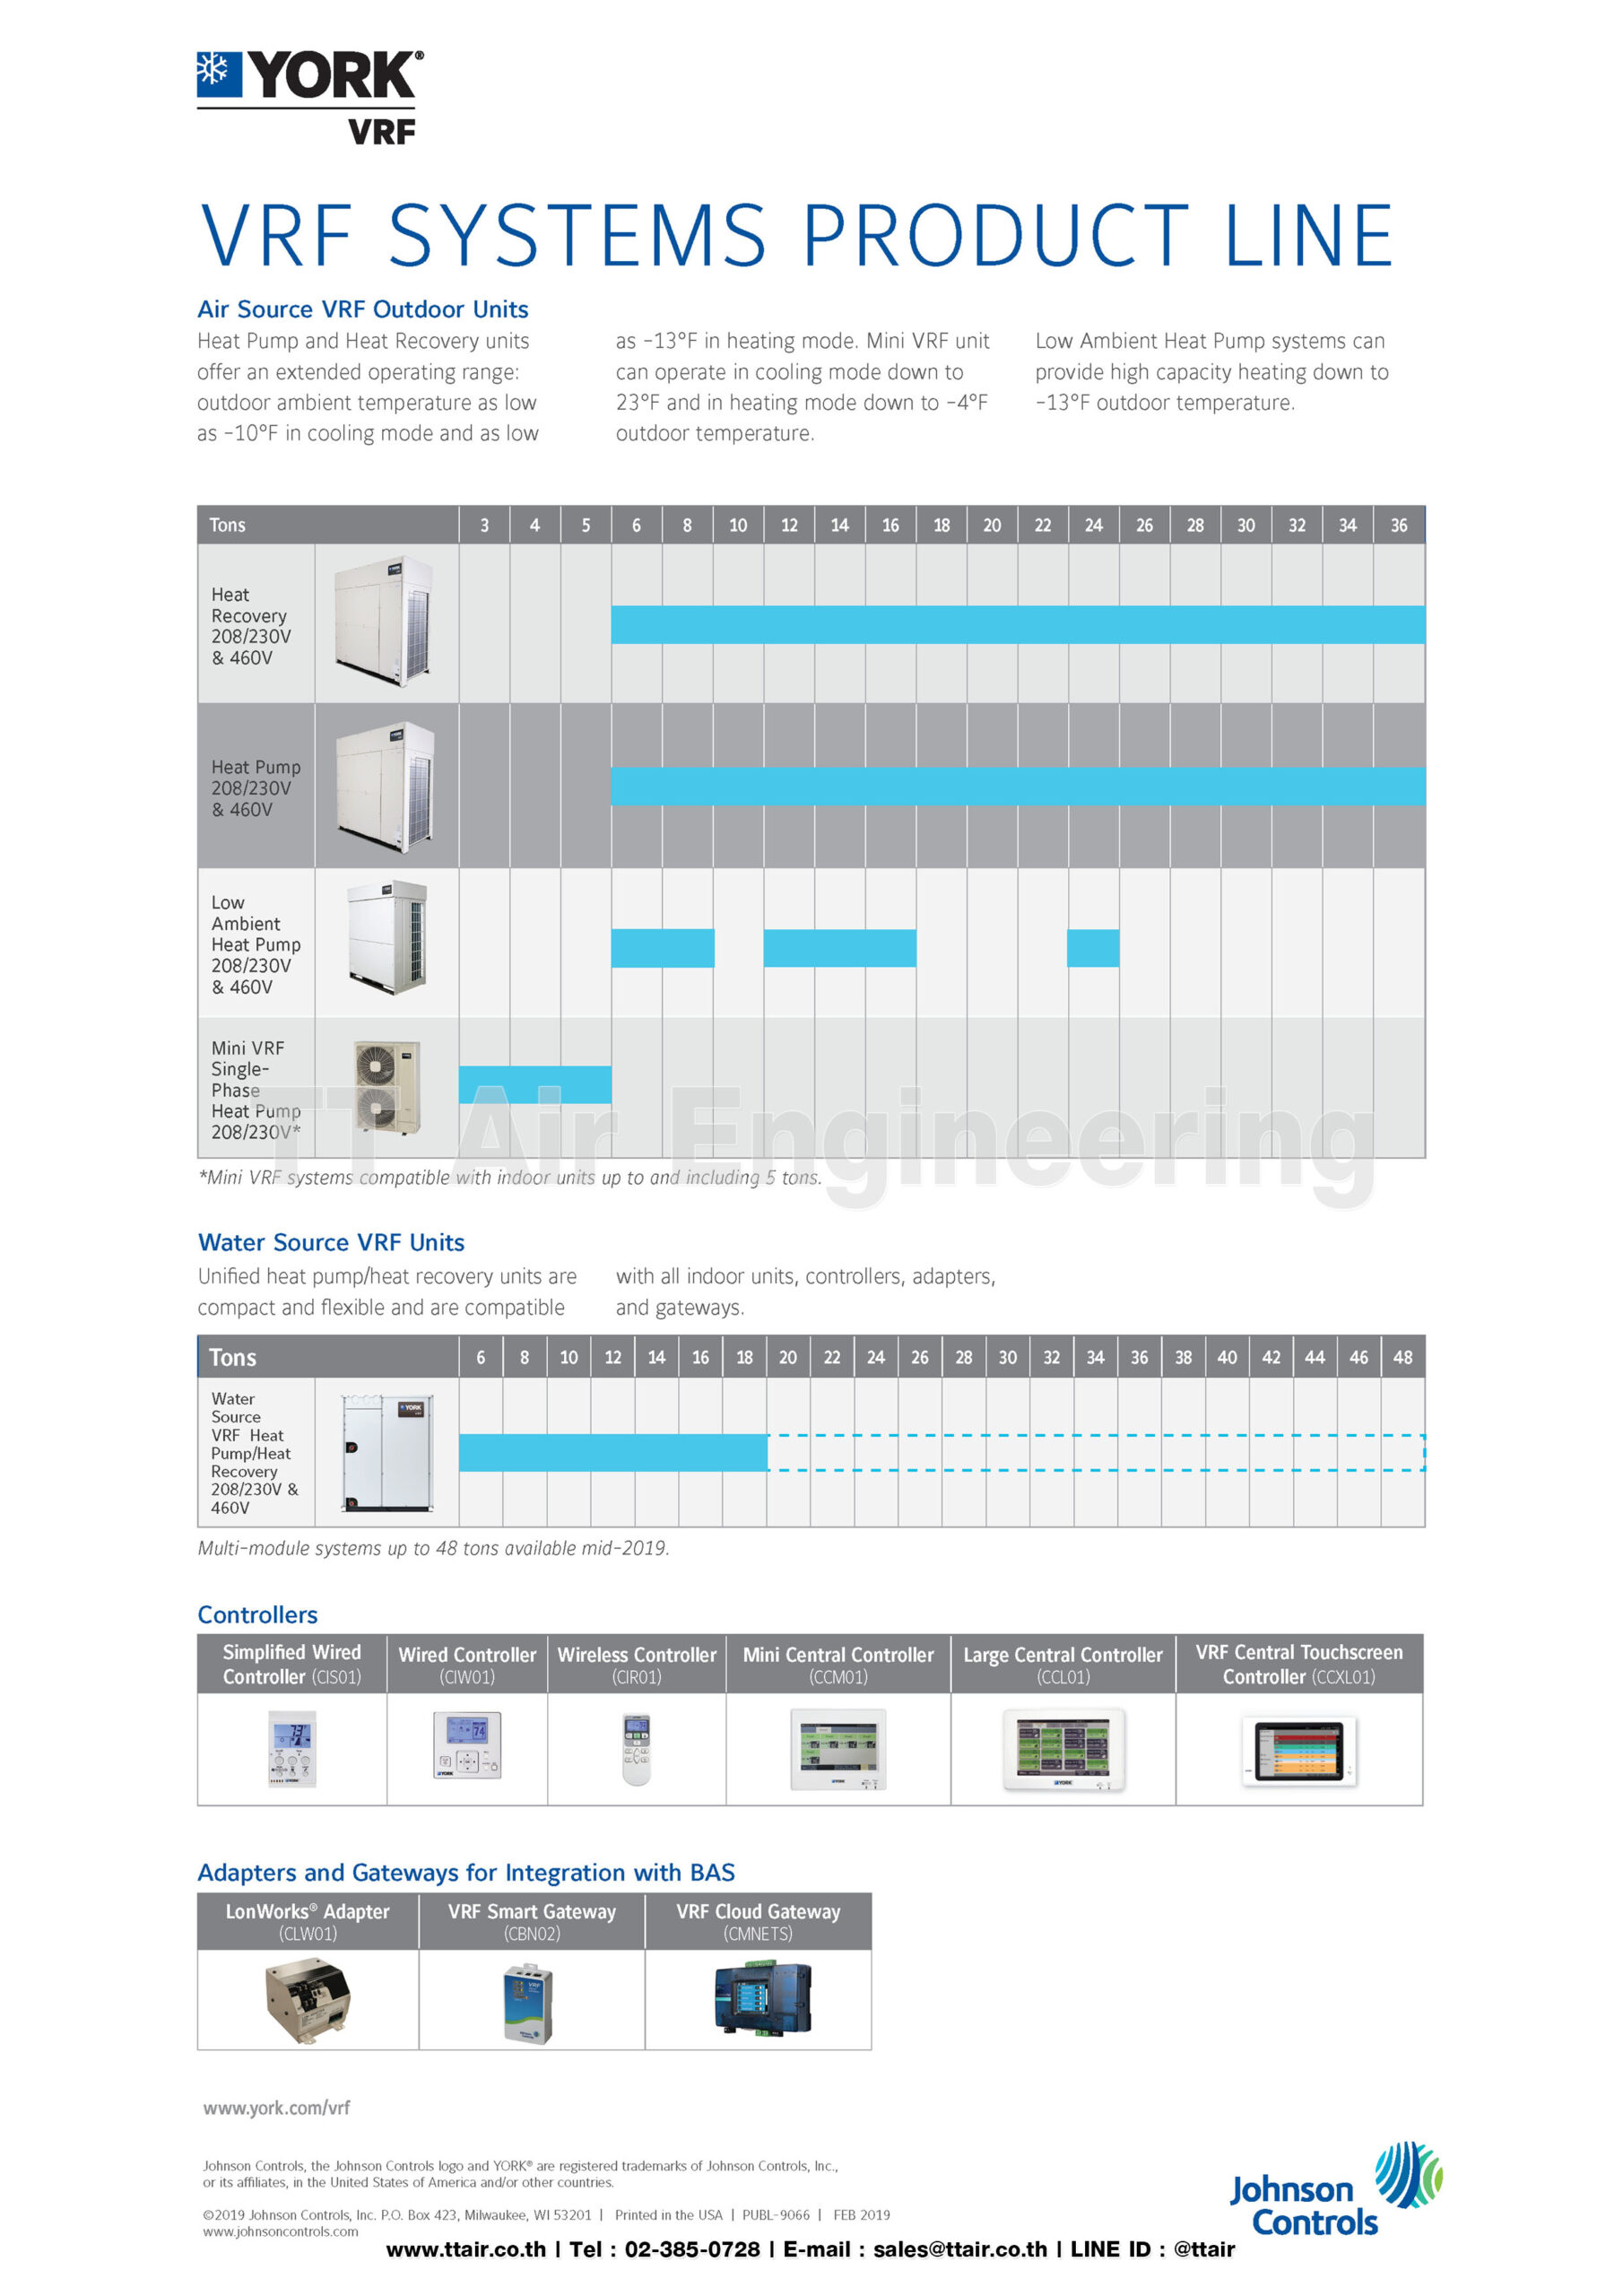 YORK VRF Systems Product Line